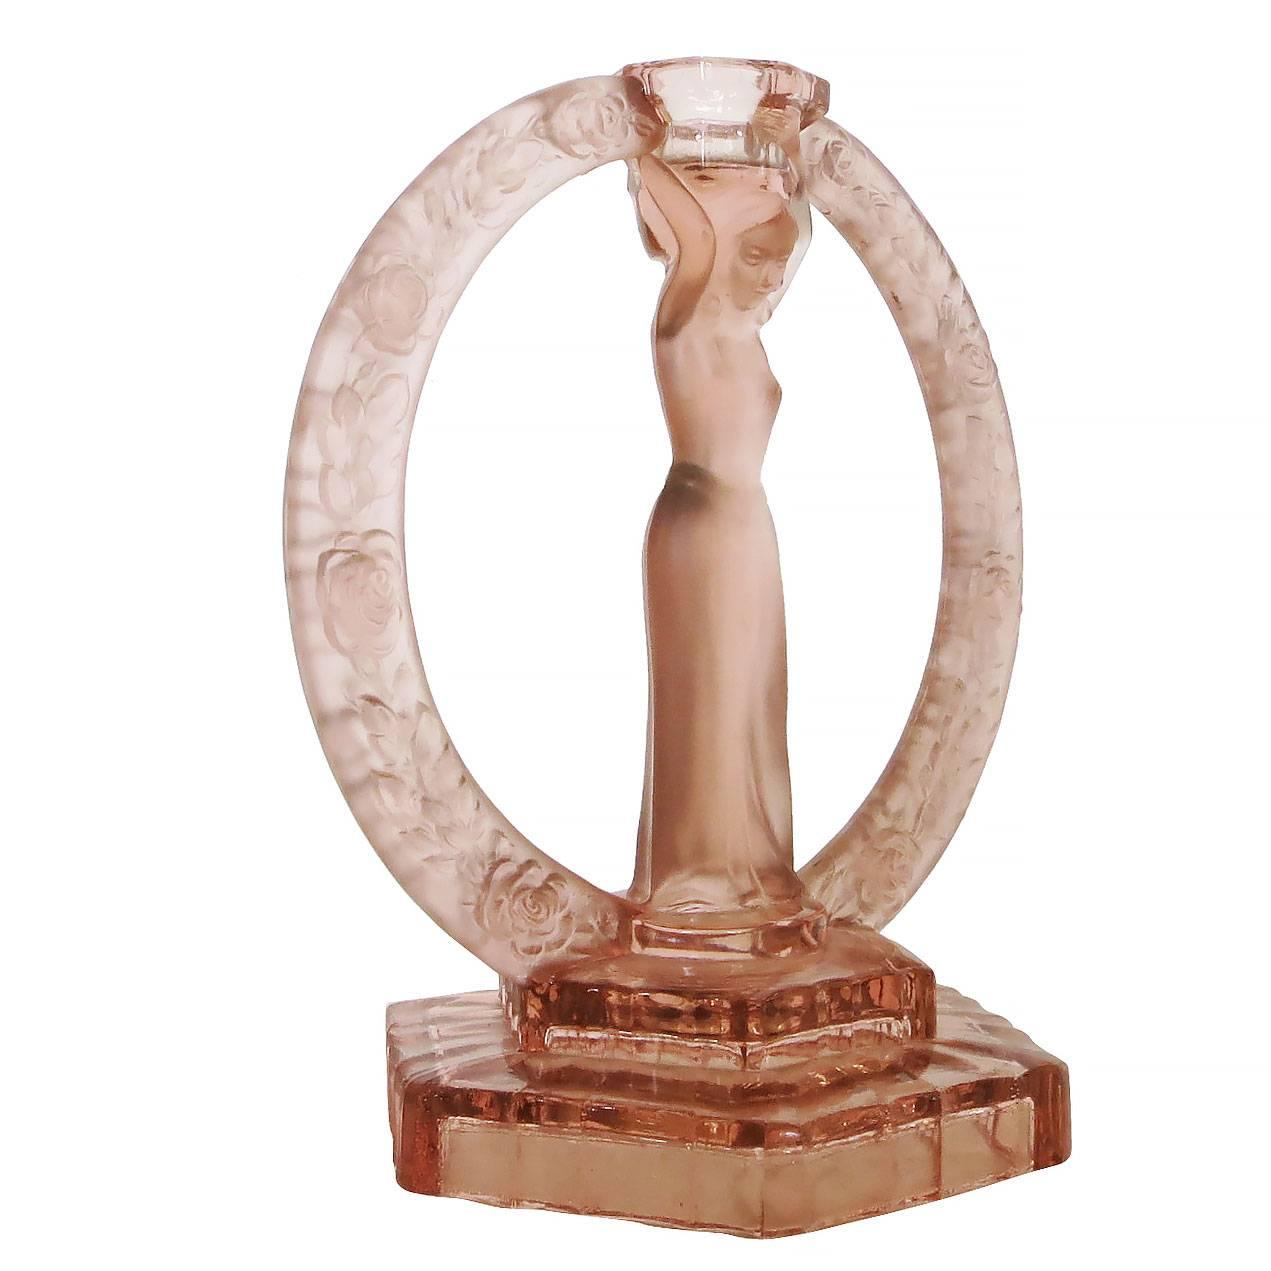 German made Art Deco frosted pink glass Flapper candlestick made

This candlestick features a young Flapper girl standing on a stepped Art Deco base with a floral halo surrounding her holding a candleholder in her hands.